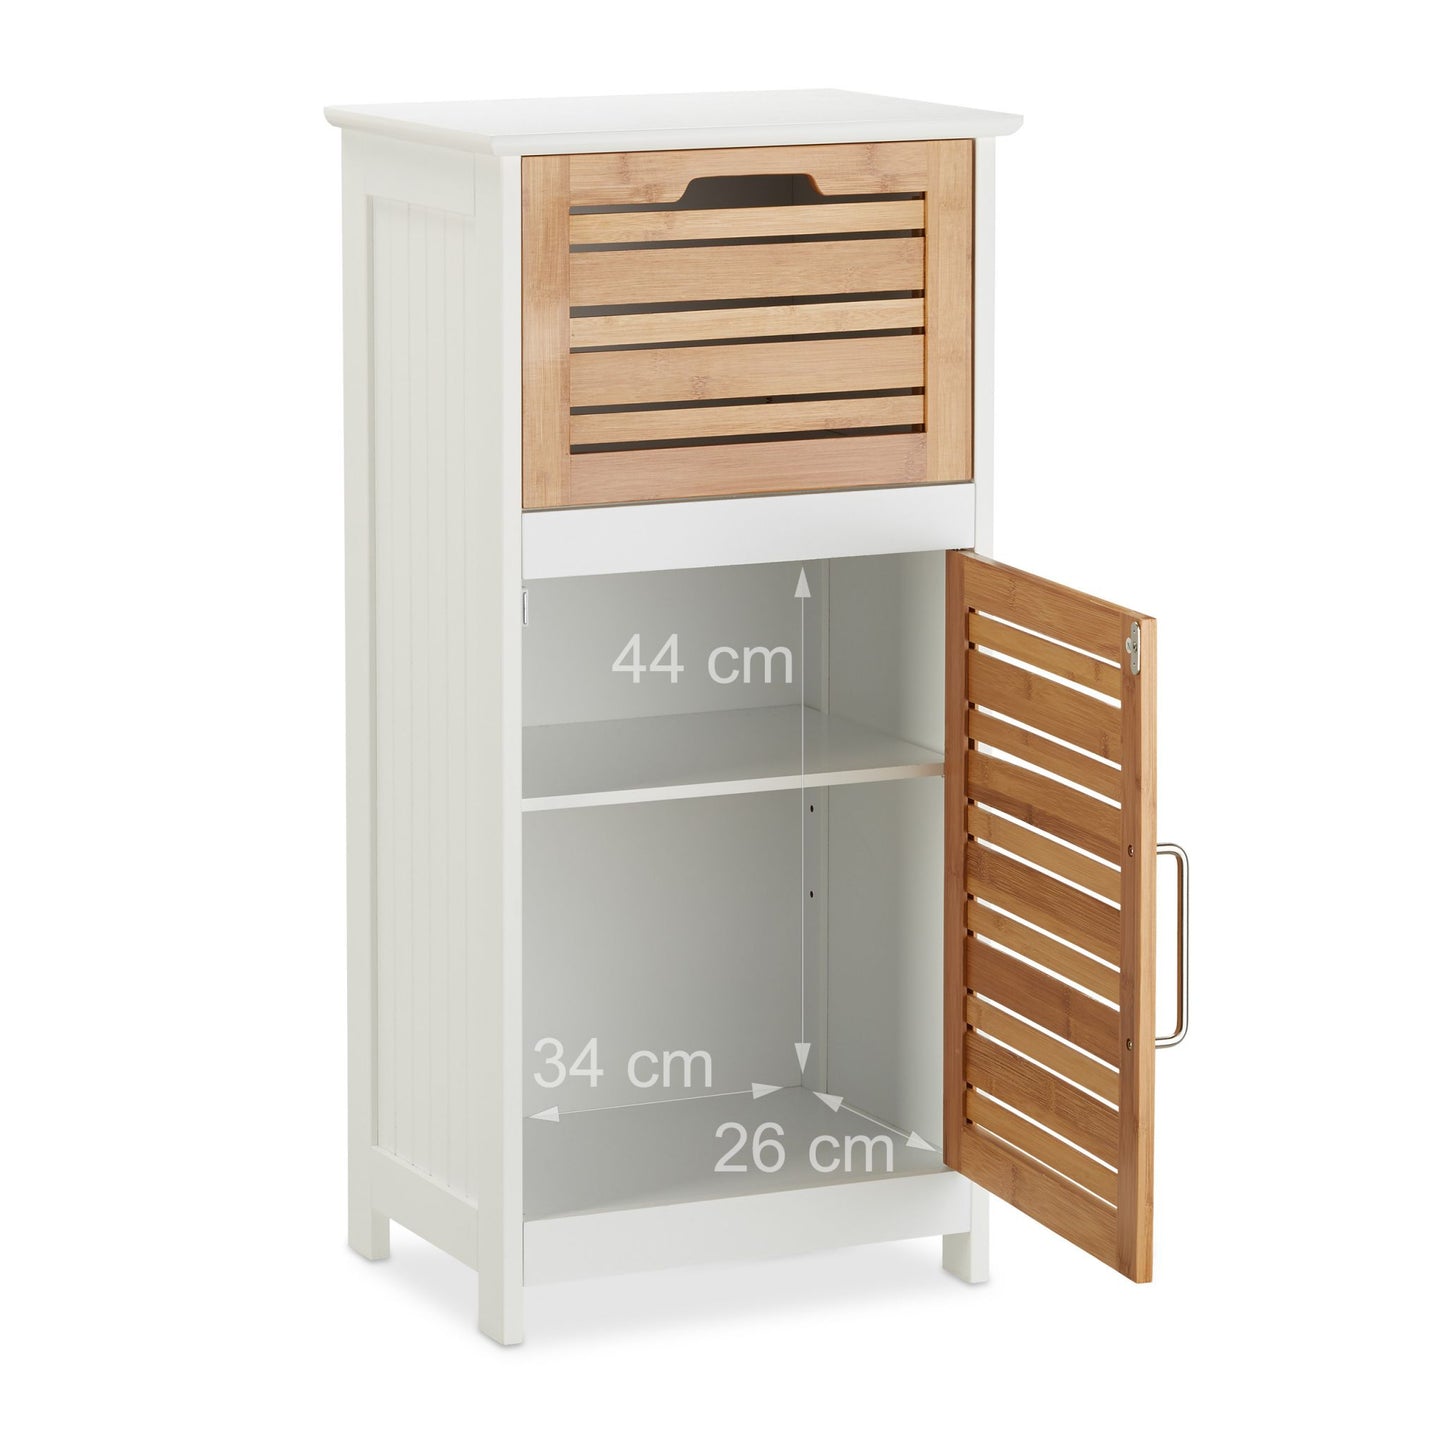 RelaxDays White Bamboo Side Cabinet Bamboo Bathrooms